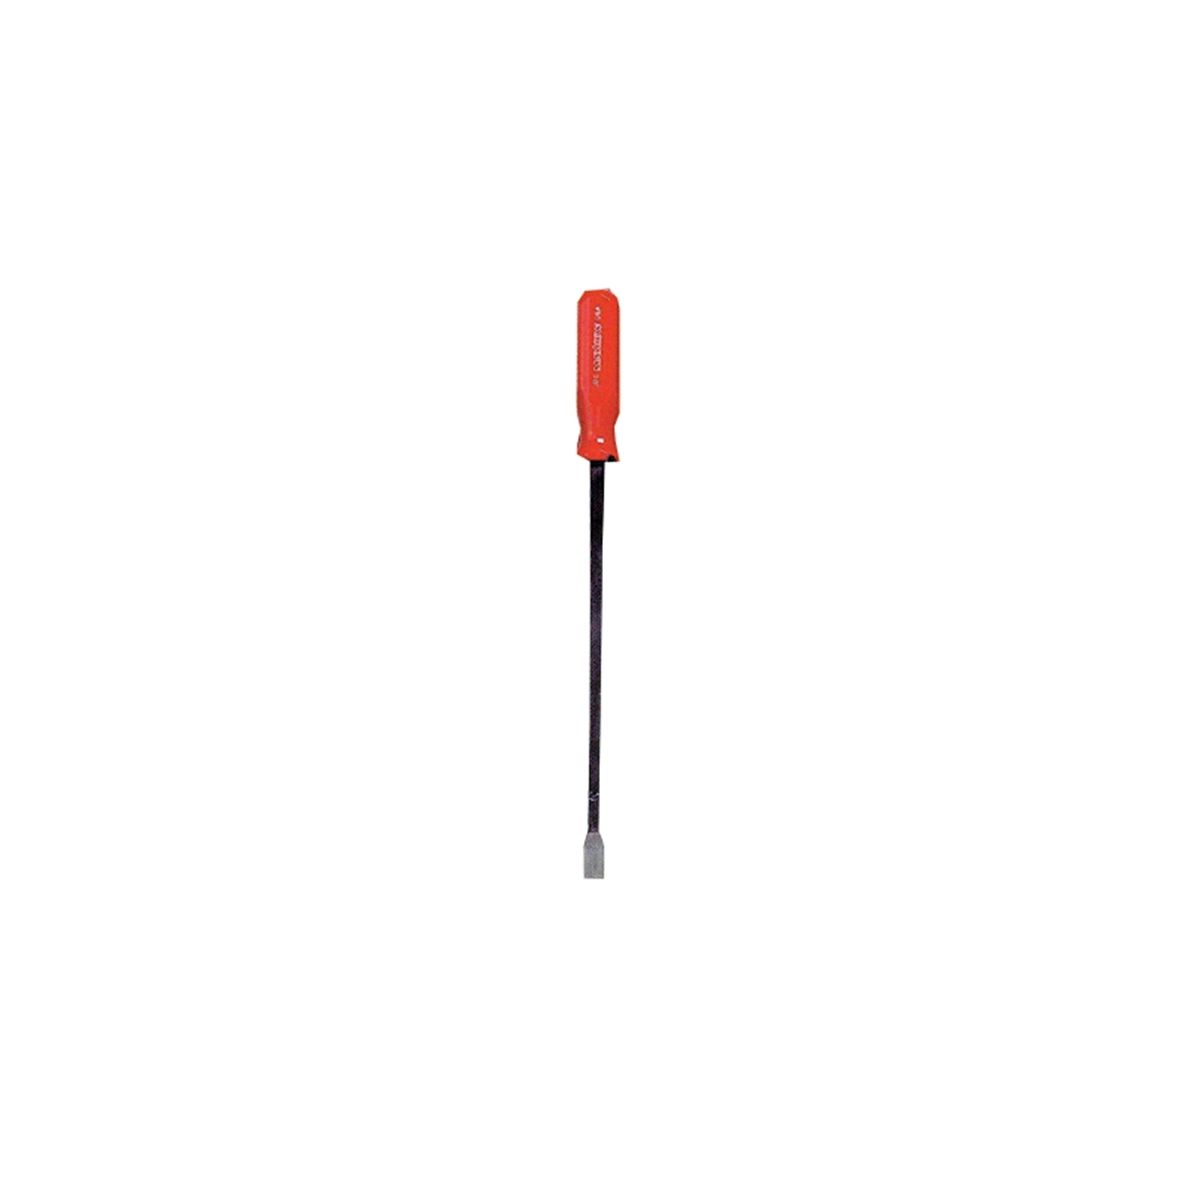 Screwdriver Type Pry Bar - 7In Curved Blade